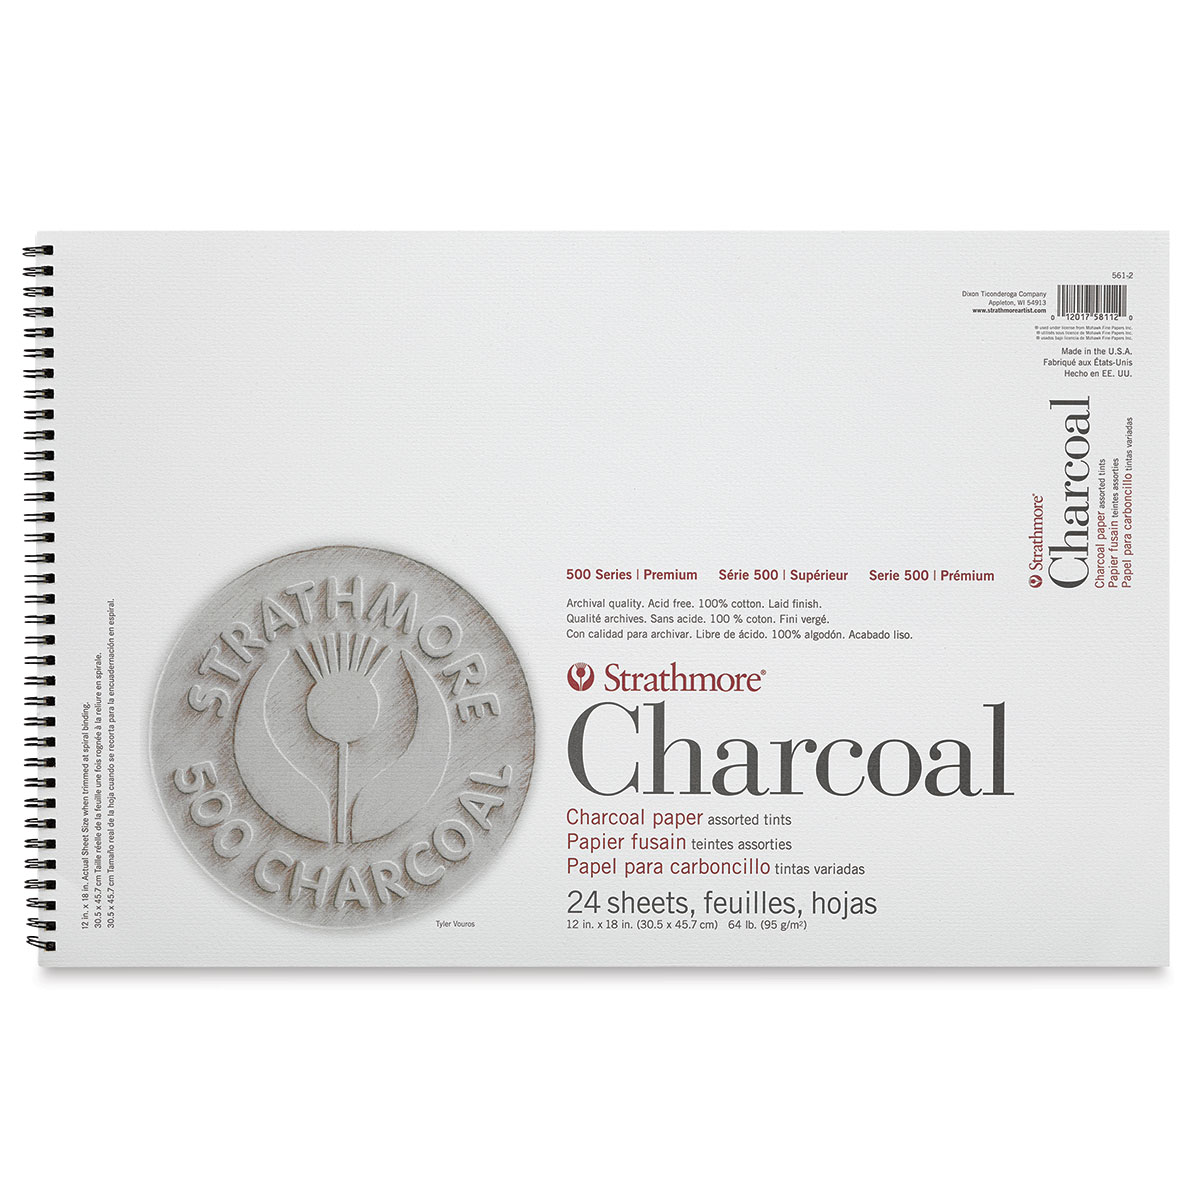 Strathmore 500 Charcoal Paper 19x25 - #131 Black, Pack of 25